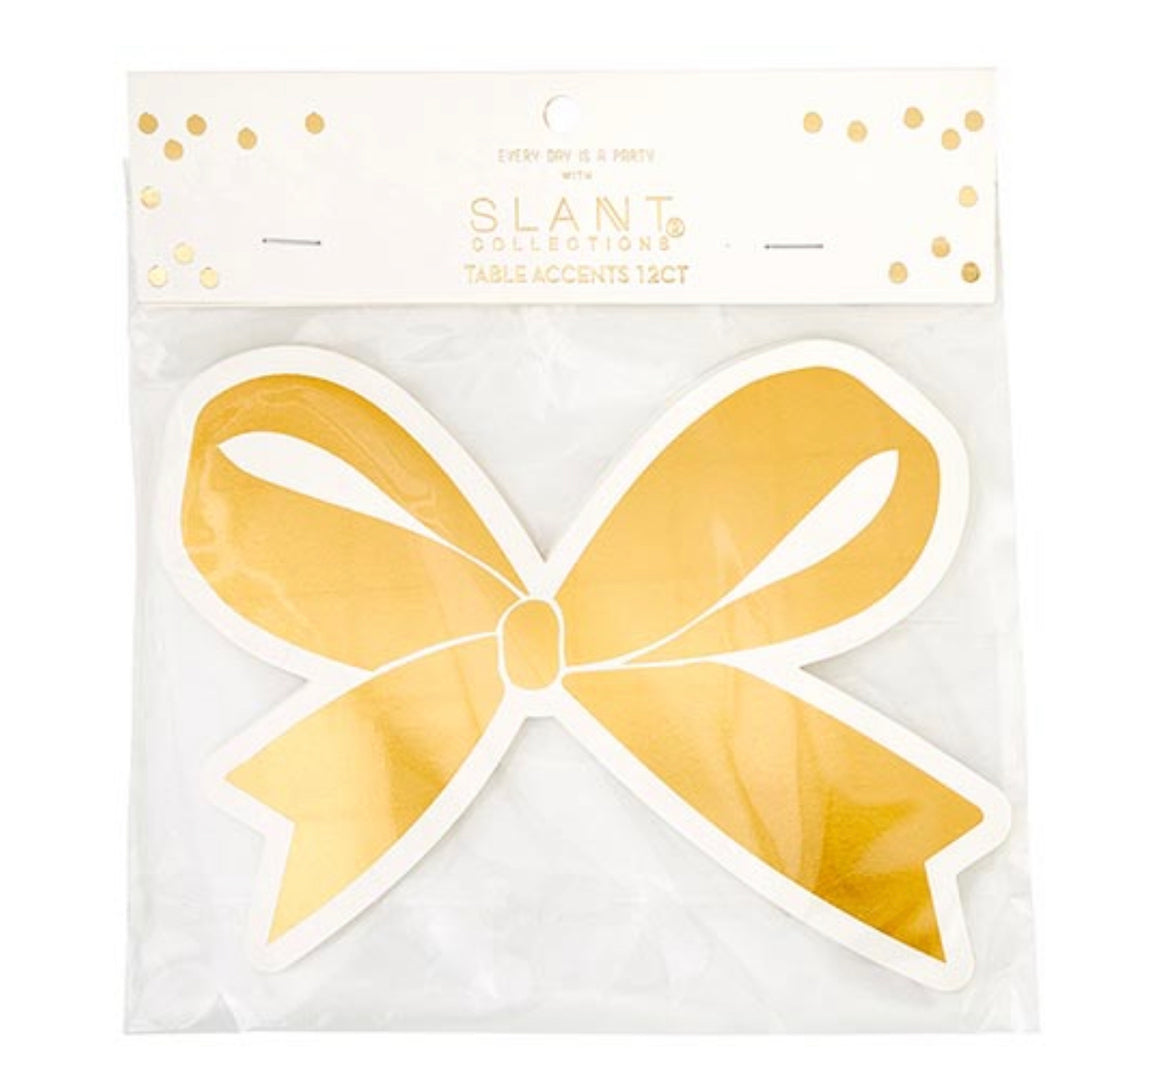 TABLE ACCENTS - GOLD FOIL BOW (Pack of 12)